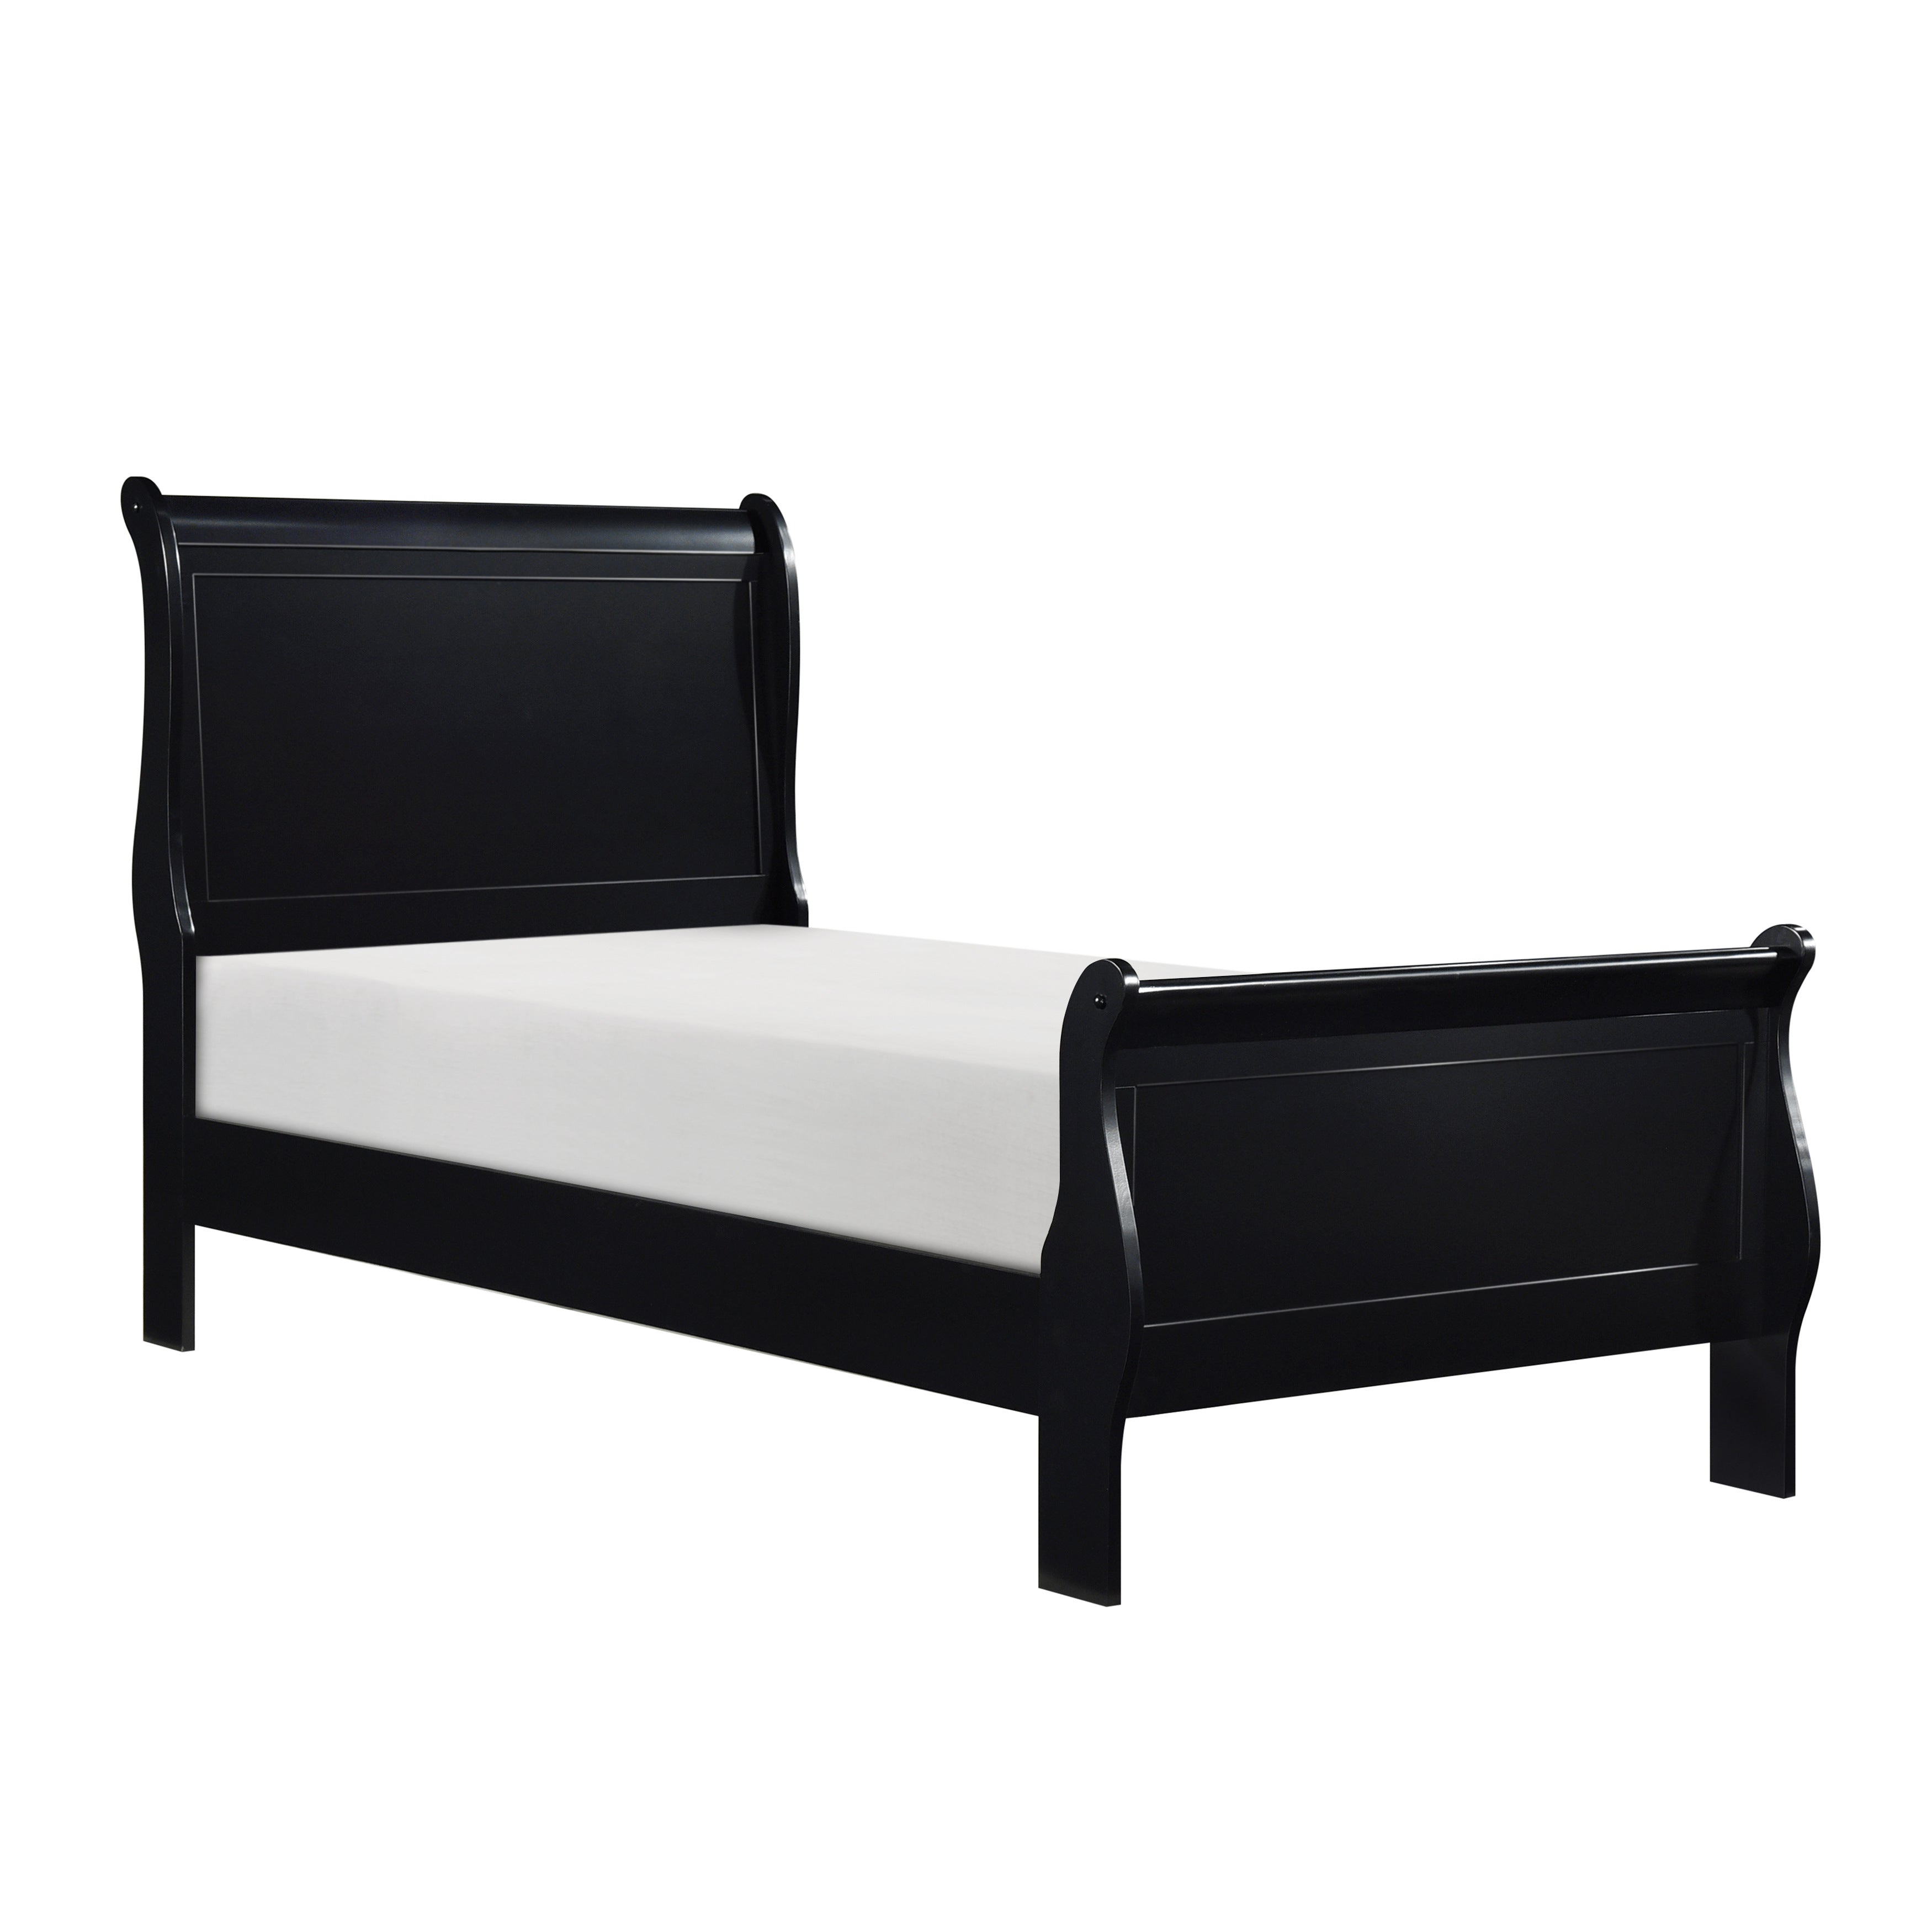 Coaster Louis Philippe Black Full Sleigh Bed